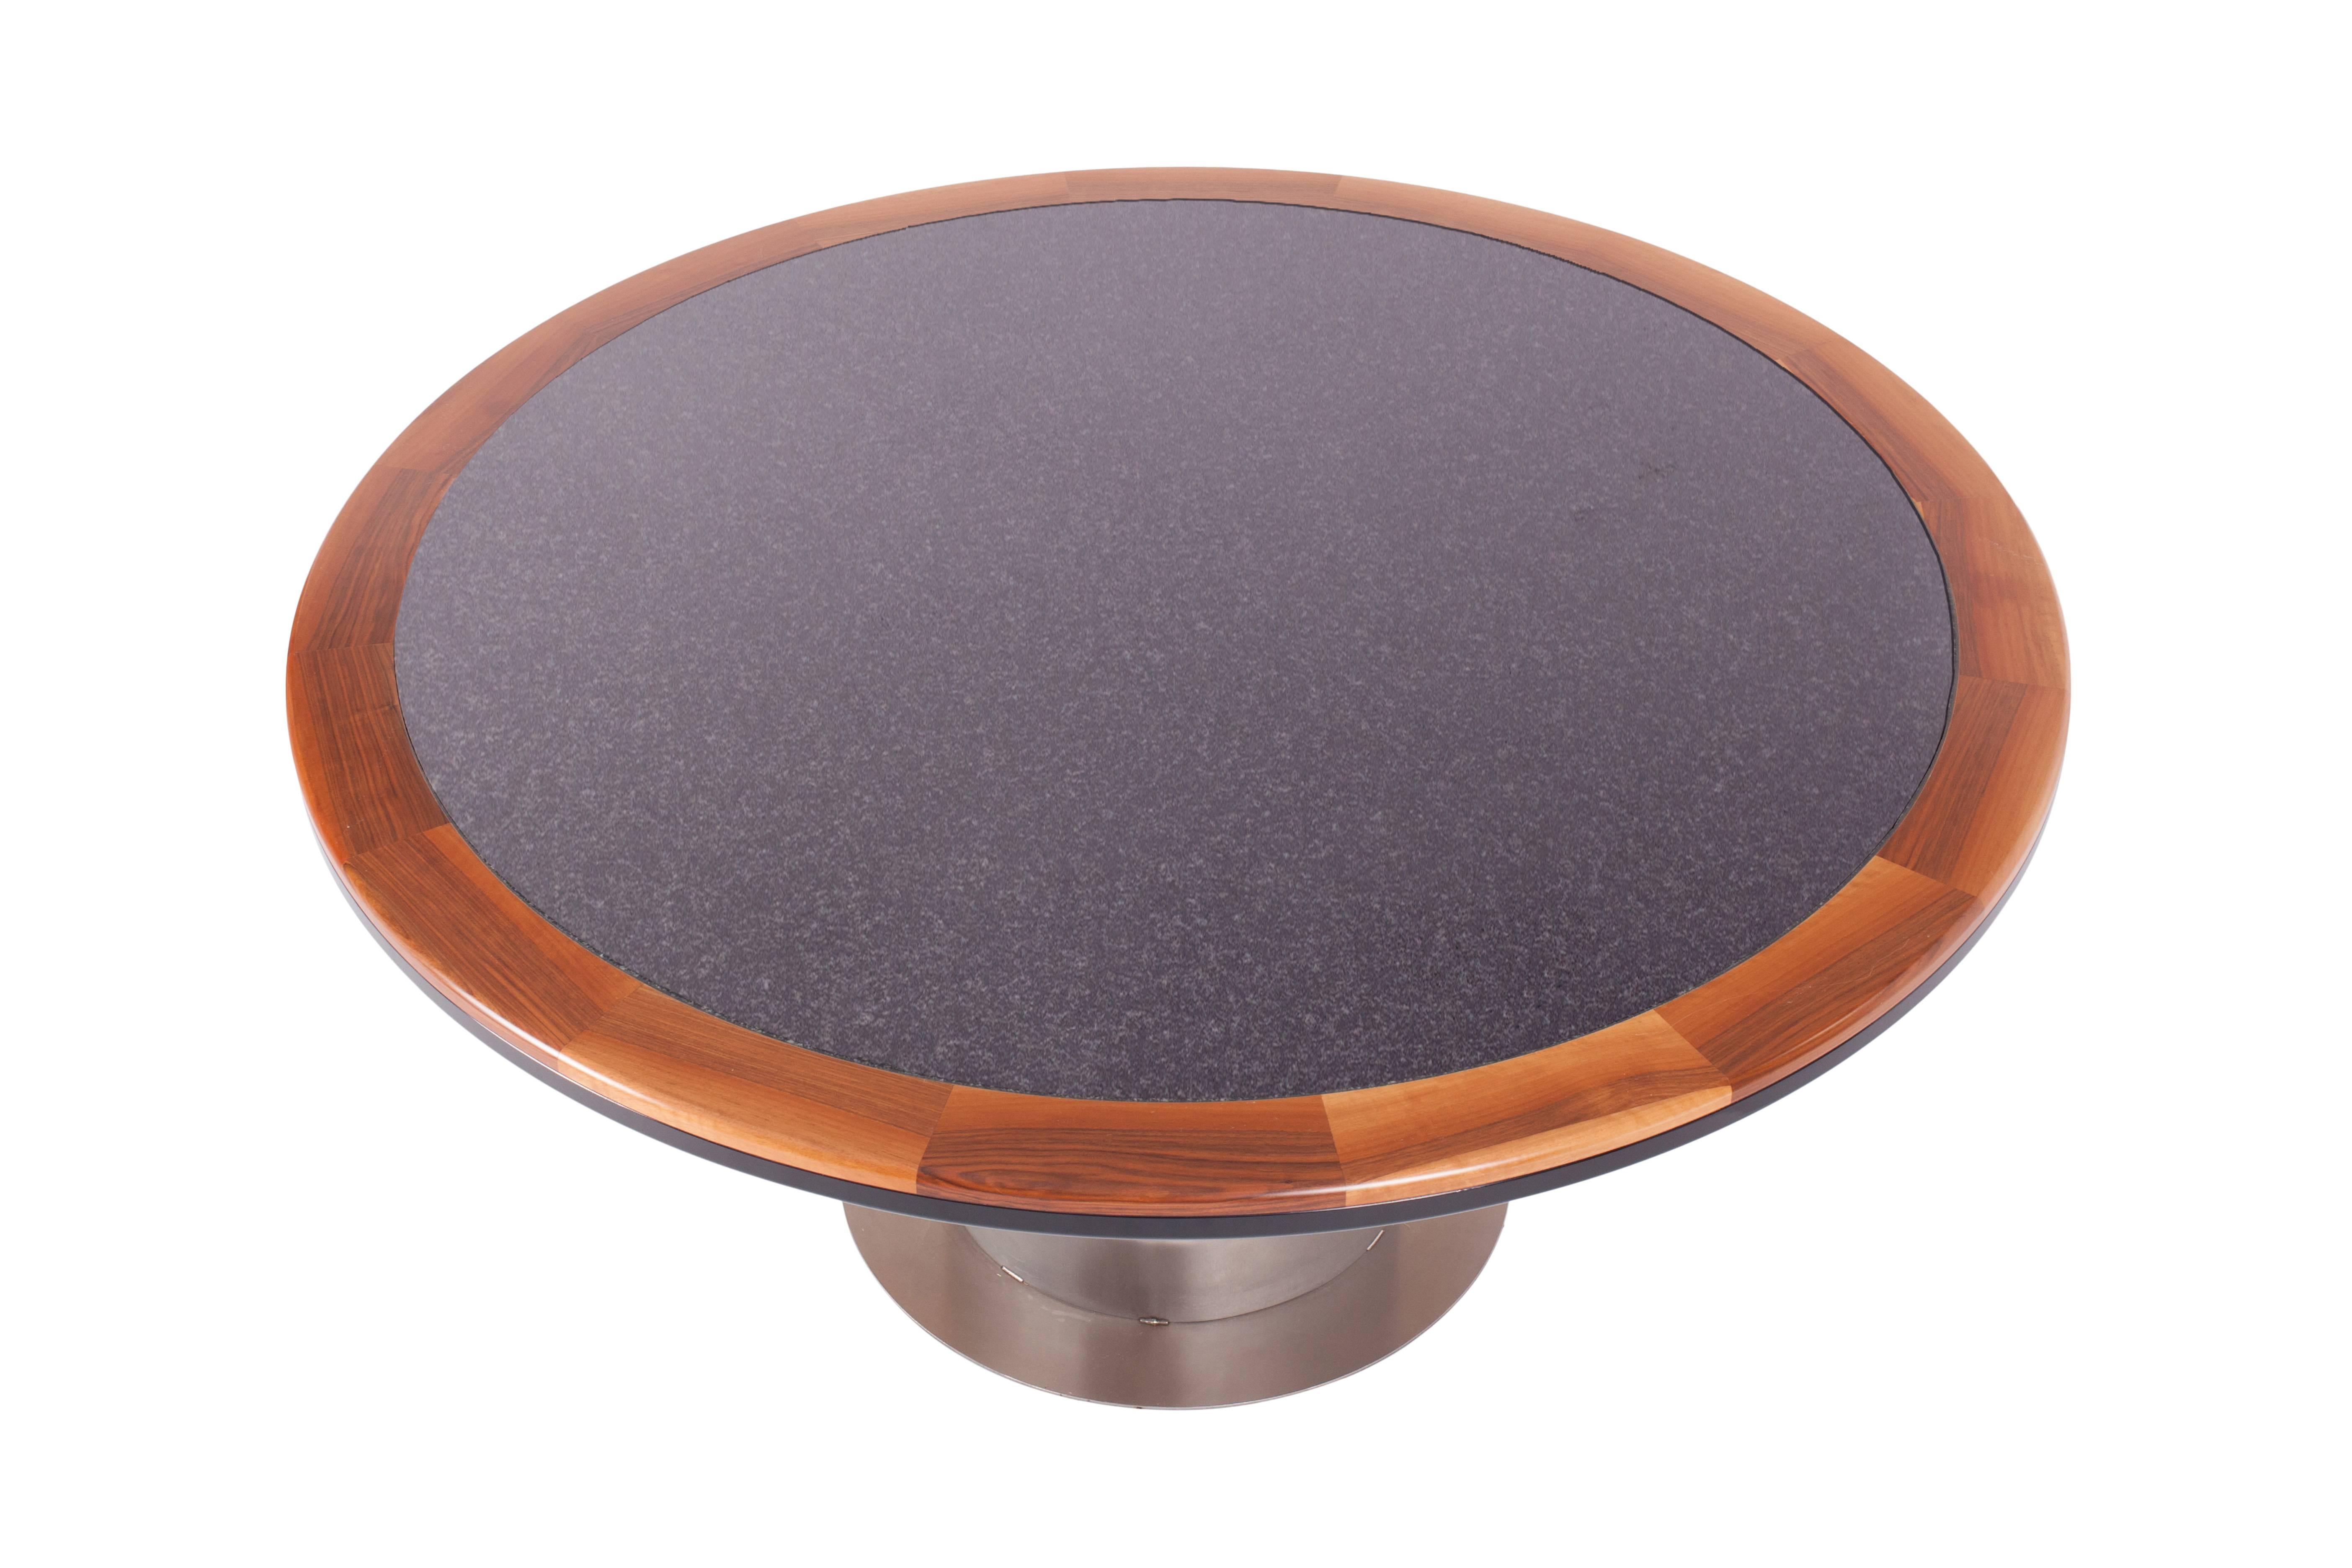 Maria Pergay style Luxury round dining table in yacht style.

A granite table top with a solid walnut and black lacquer edge,
mounted on a stainless steel base

European 1980s.

Measures: Ø 160 cm, H 74.5 cm.

 